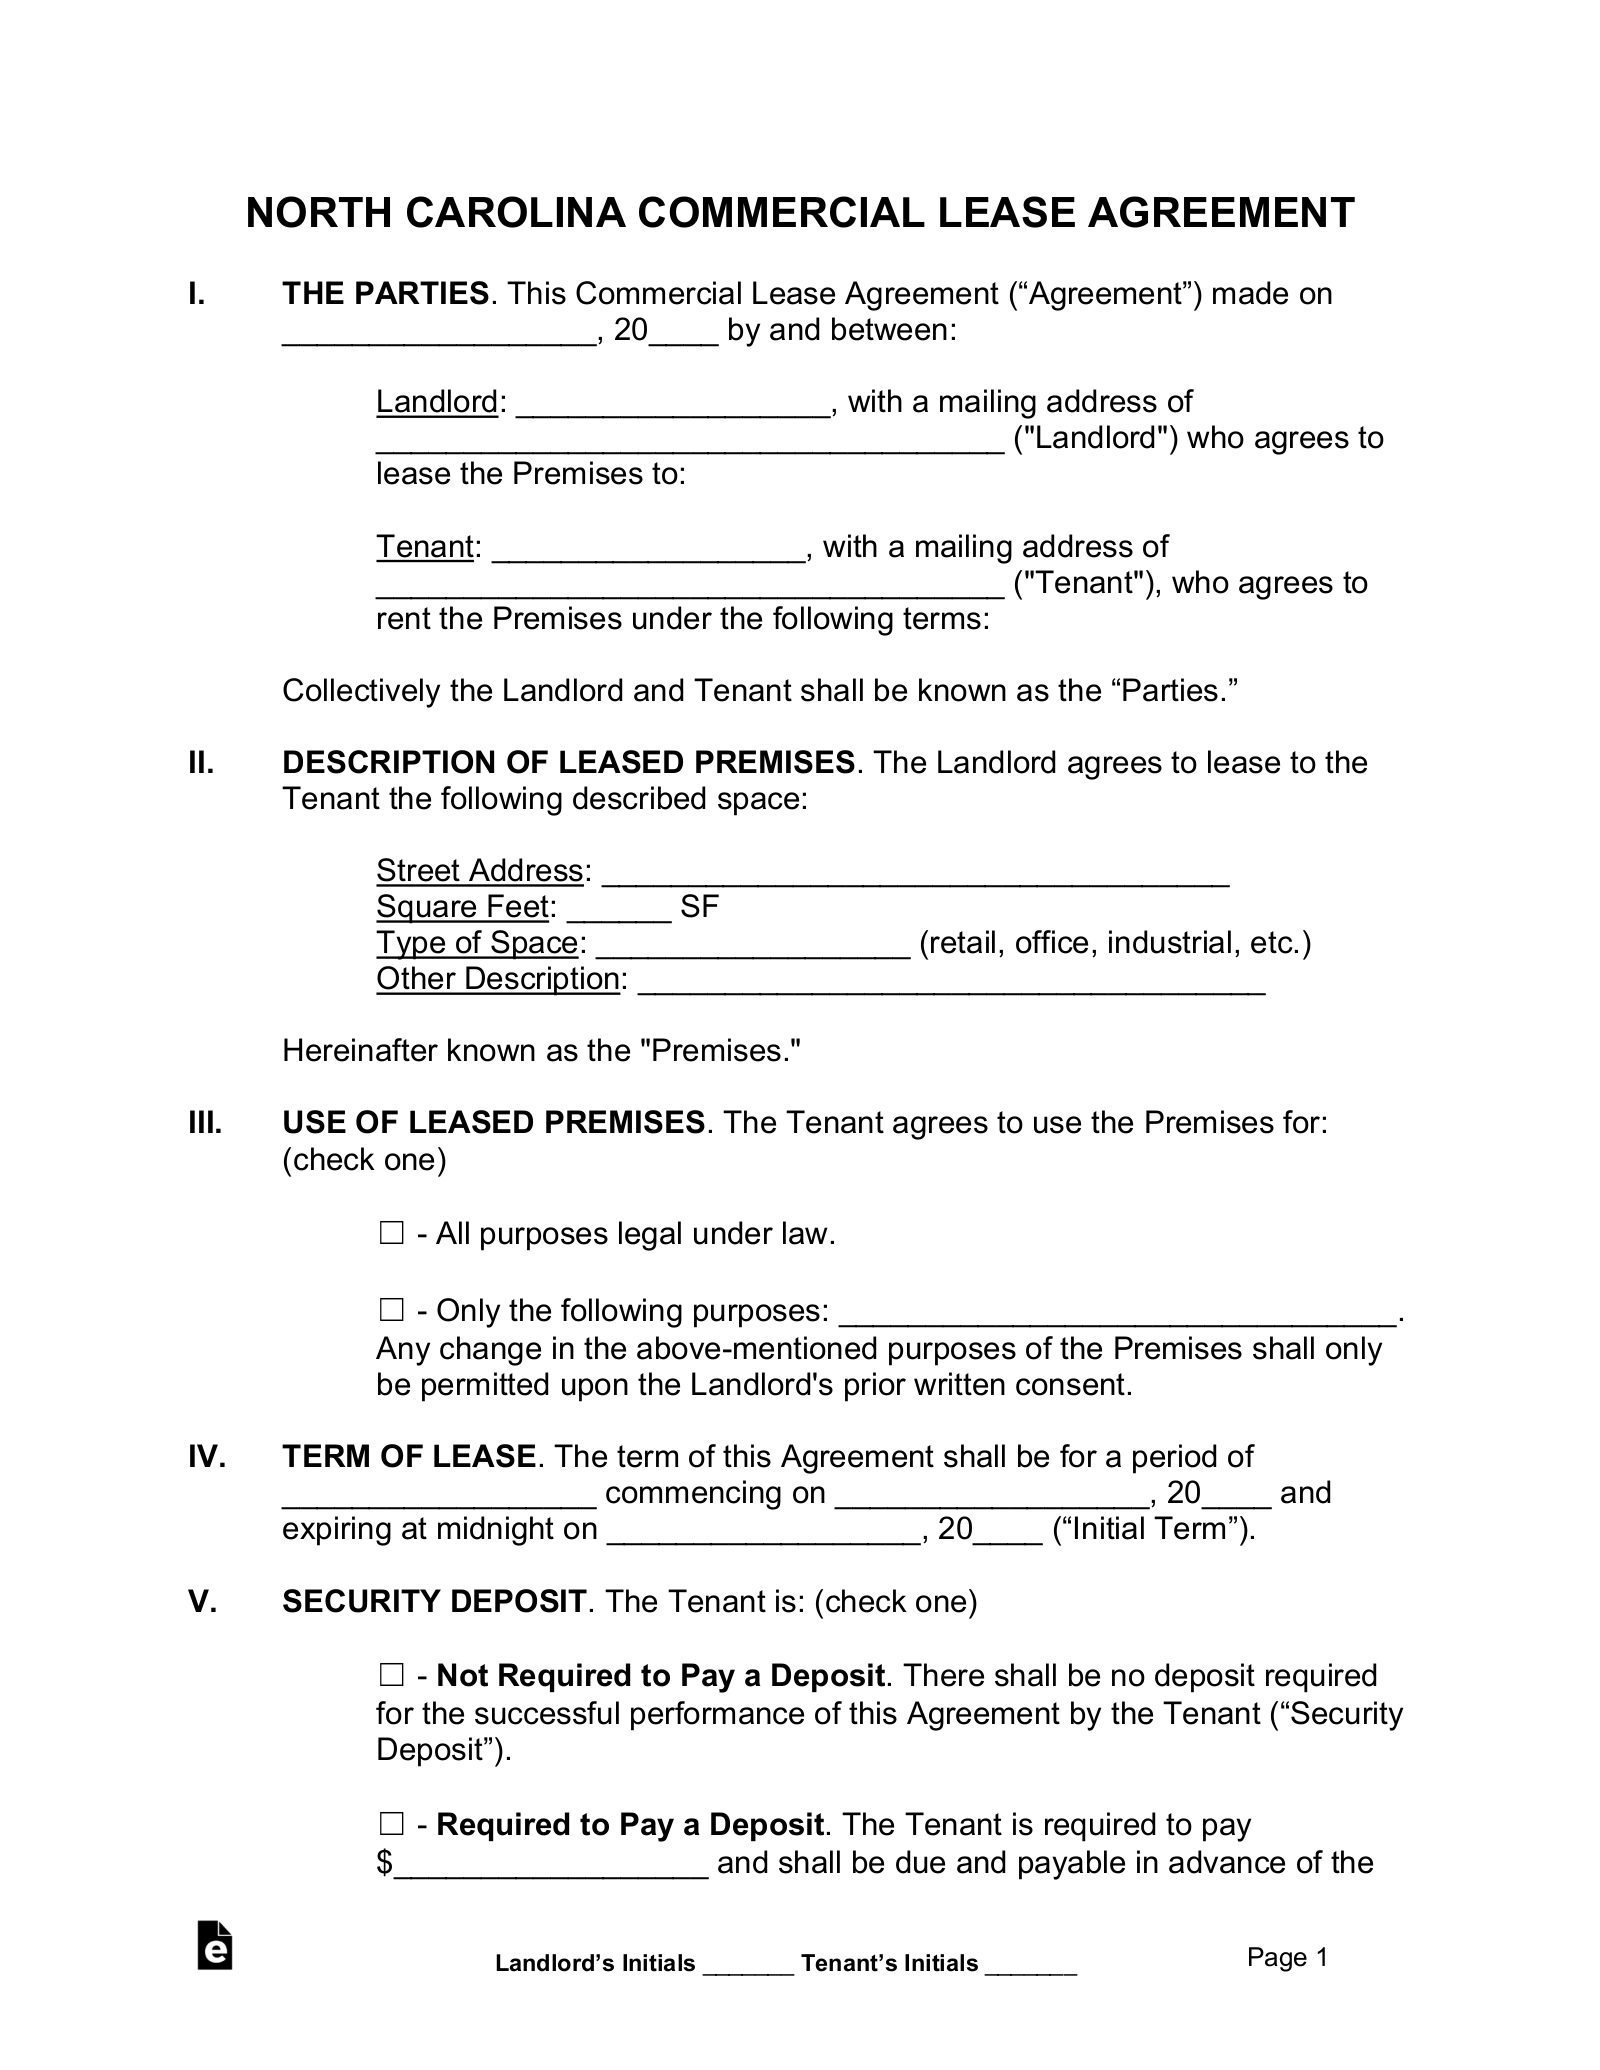 North Carolina Commercial Lease Agreement Template